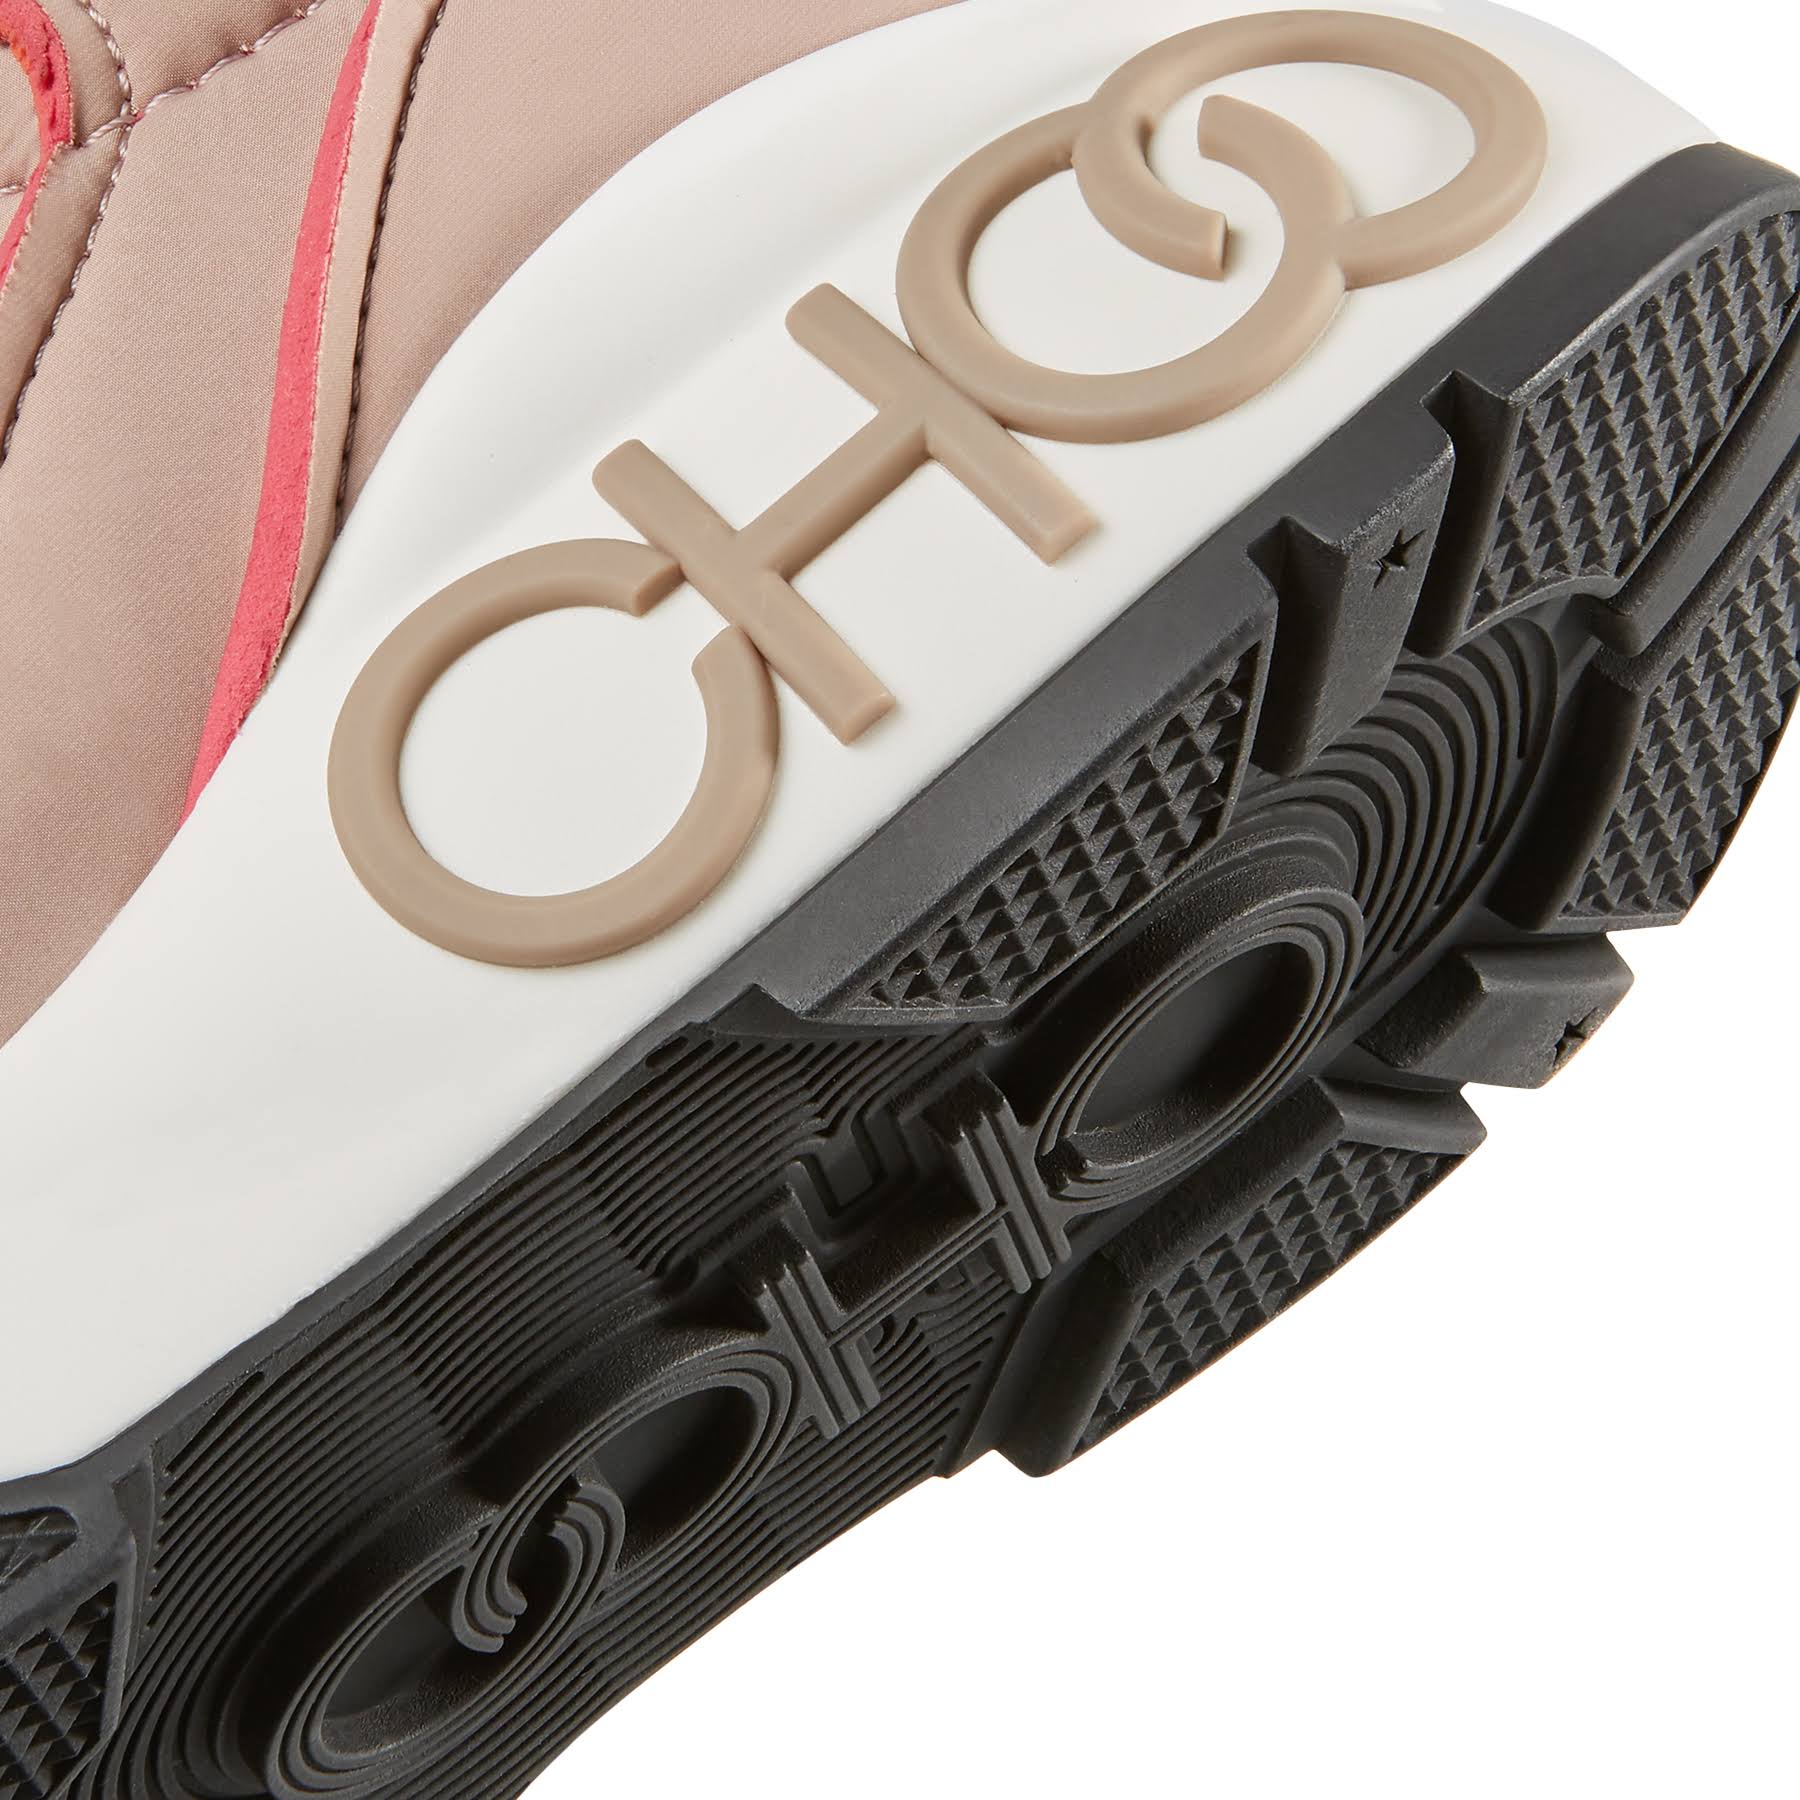 Jimmy Choo Ballet Pink and Red Raine Sneakers